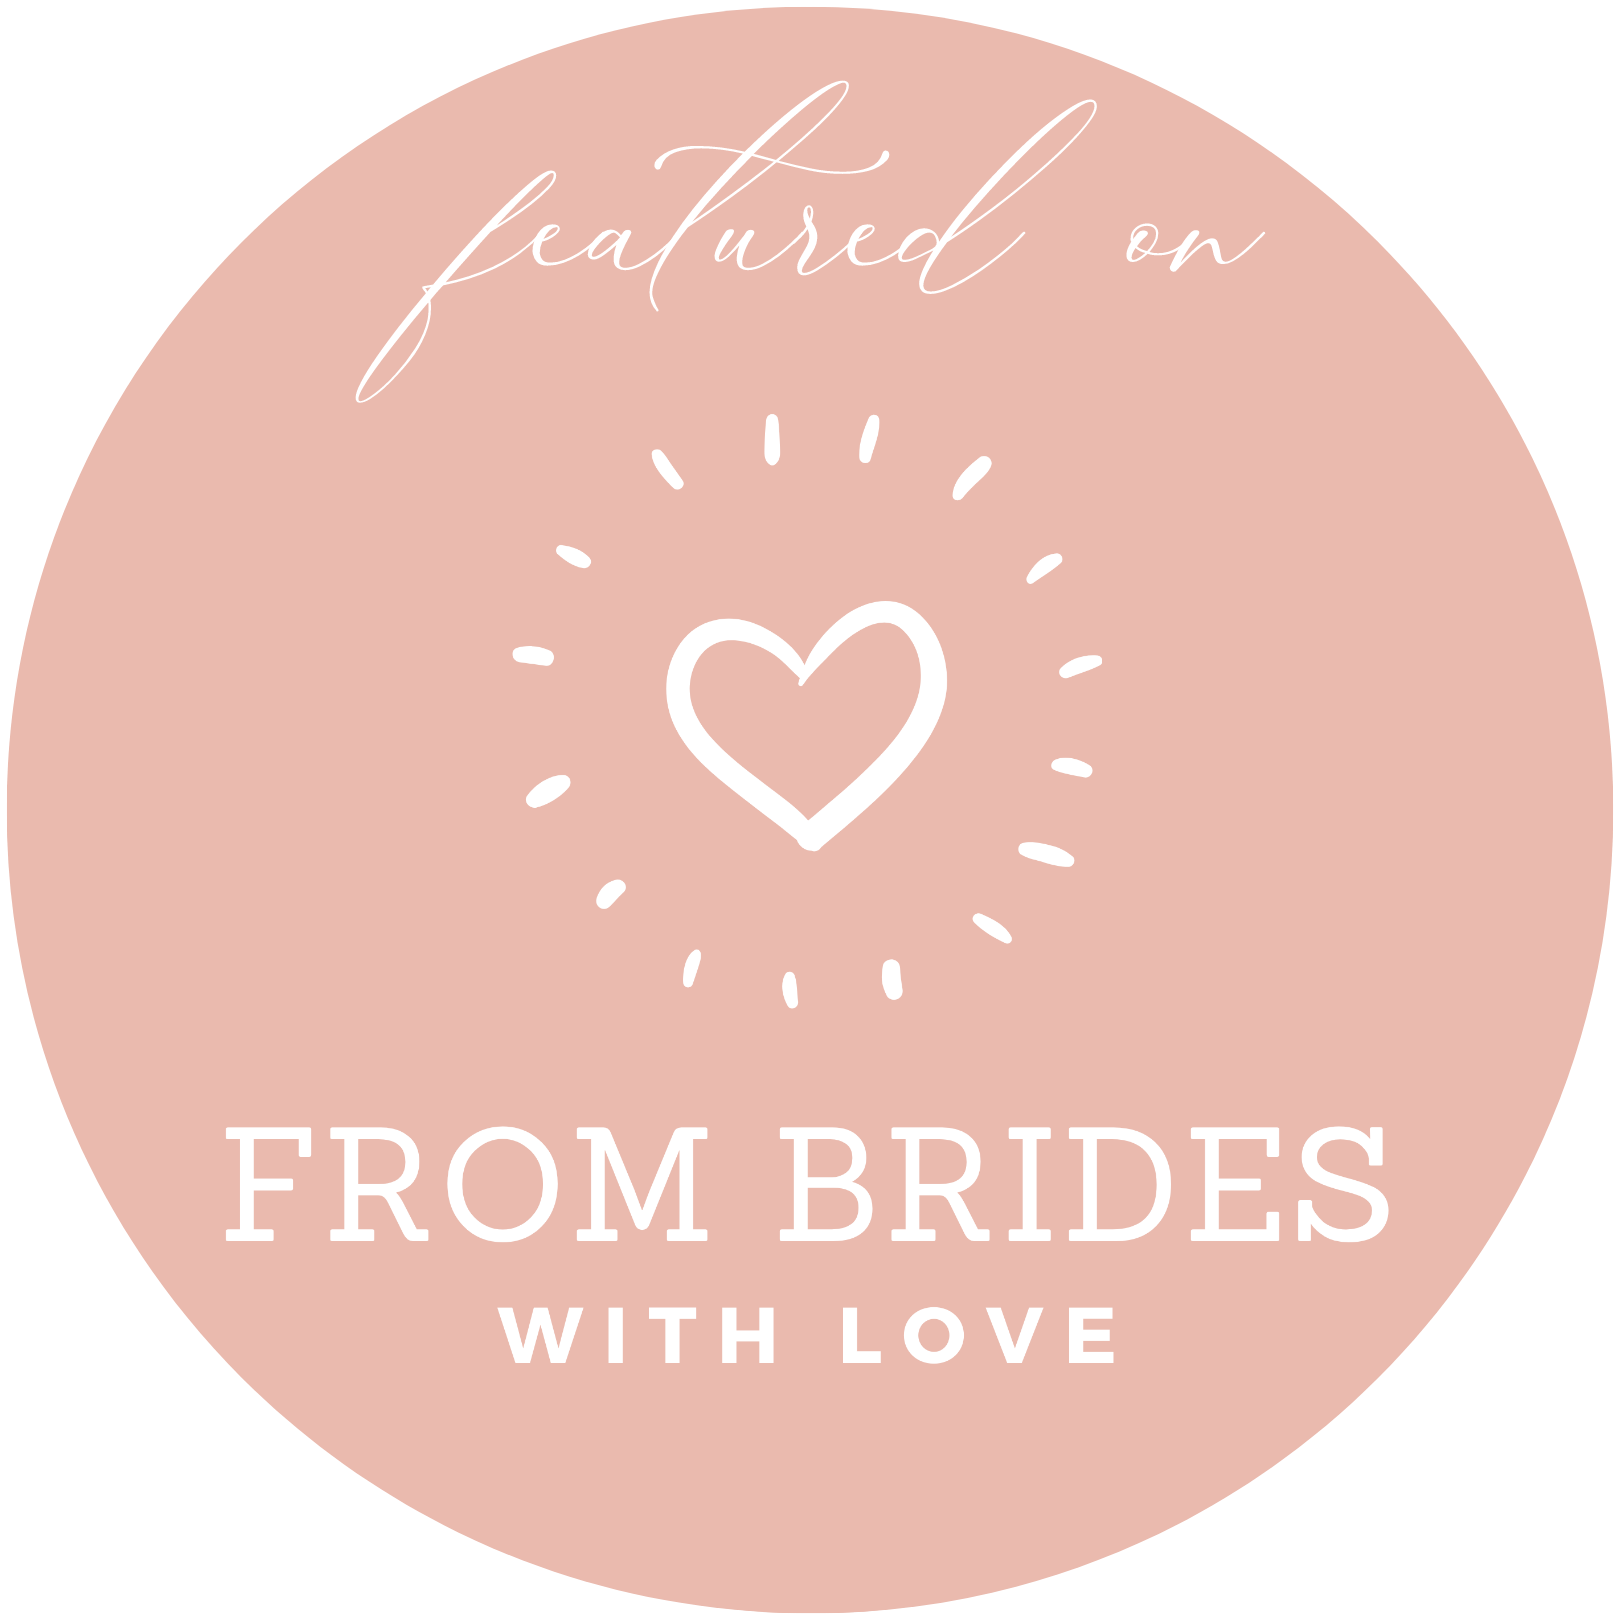 From Brides with Love